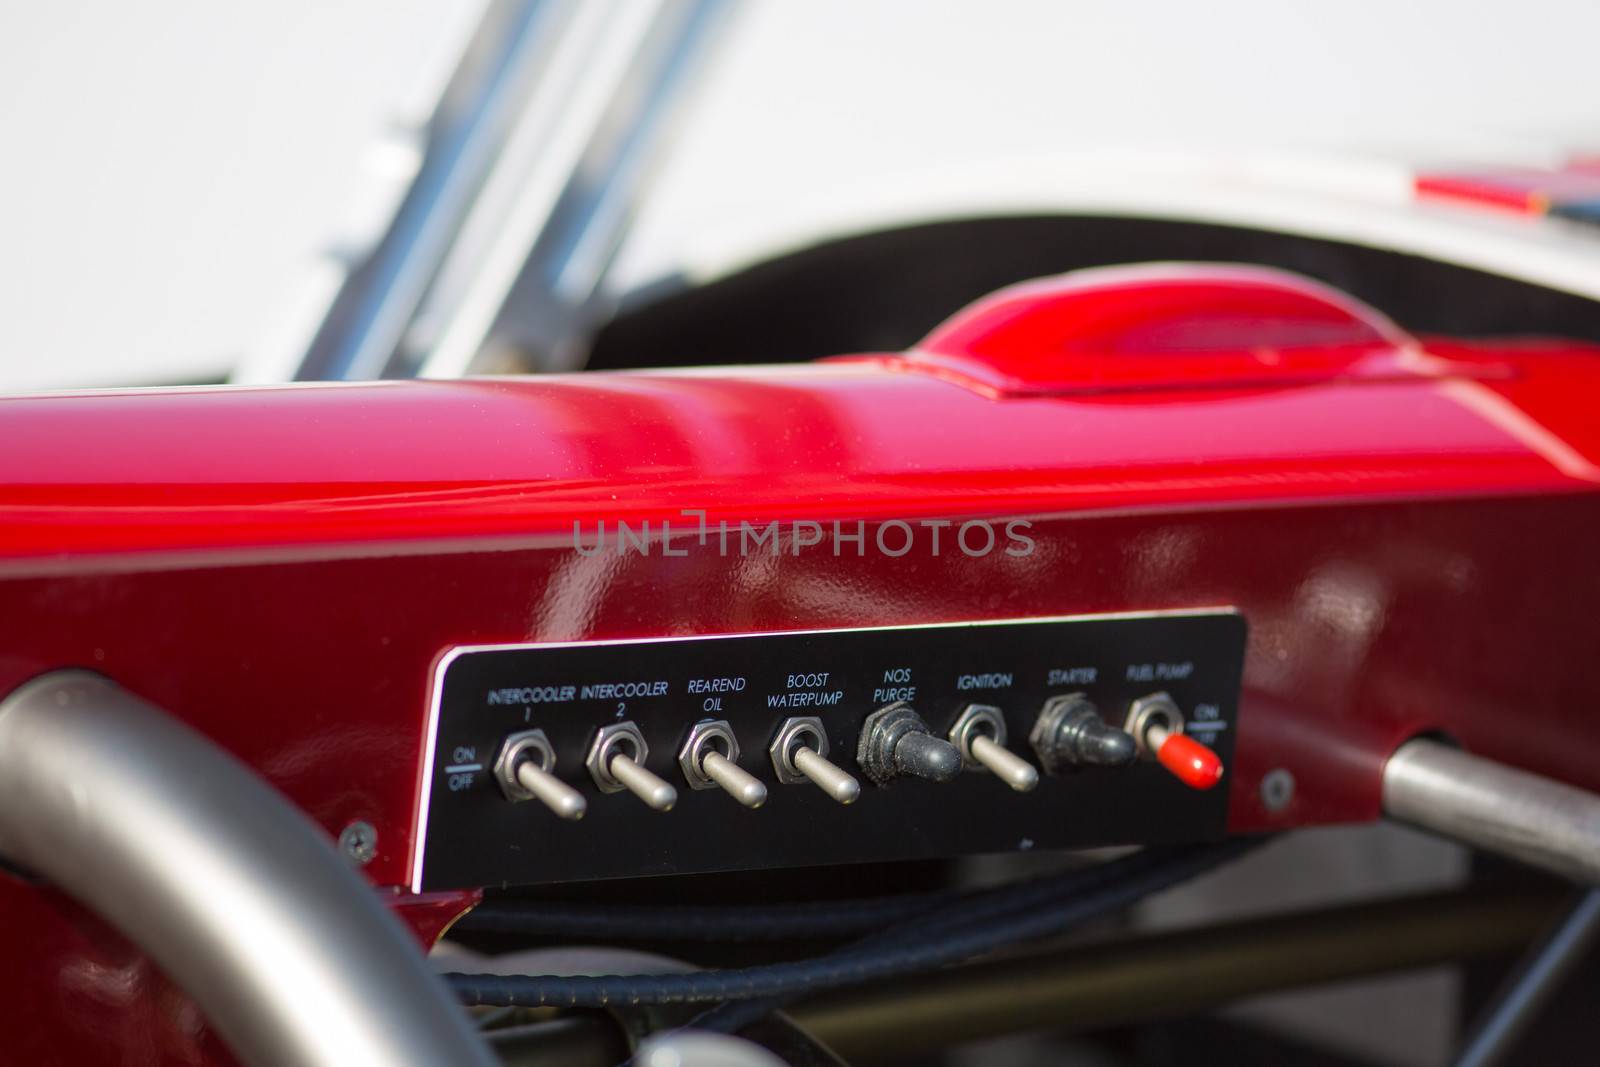 Hot Rod, detail of the control panel by watchtheworld